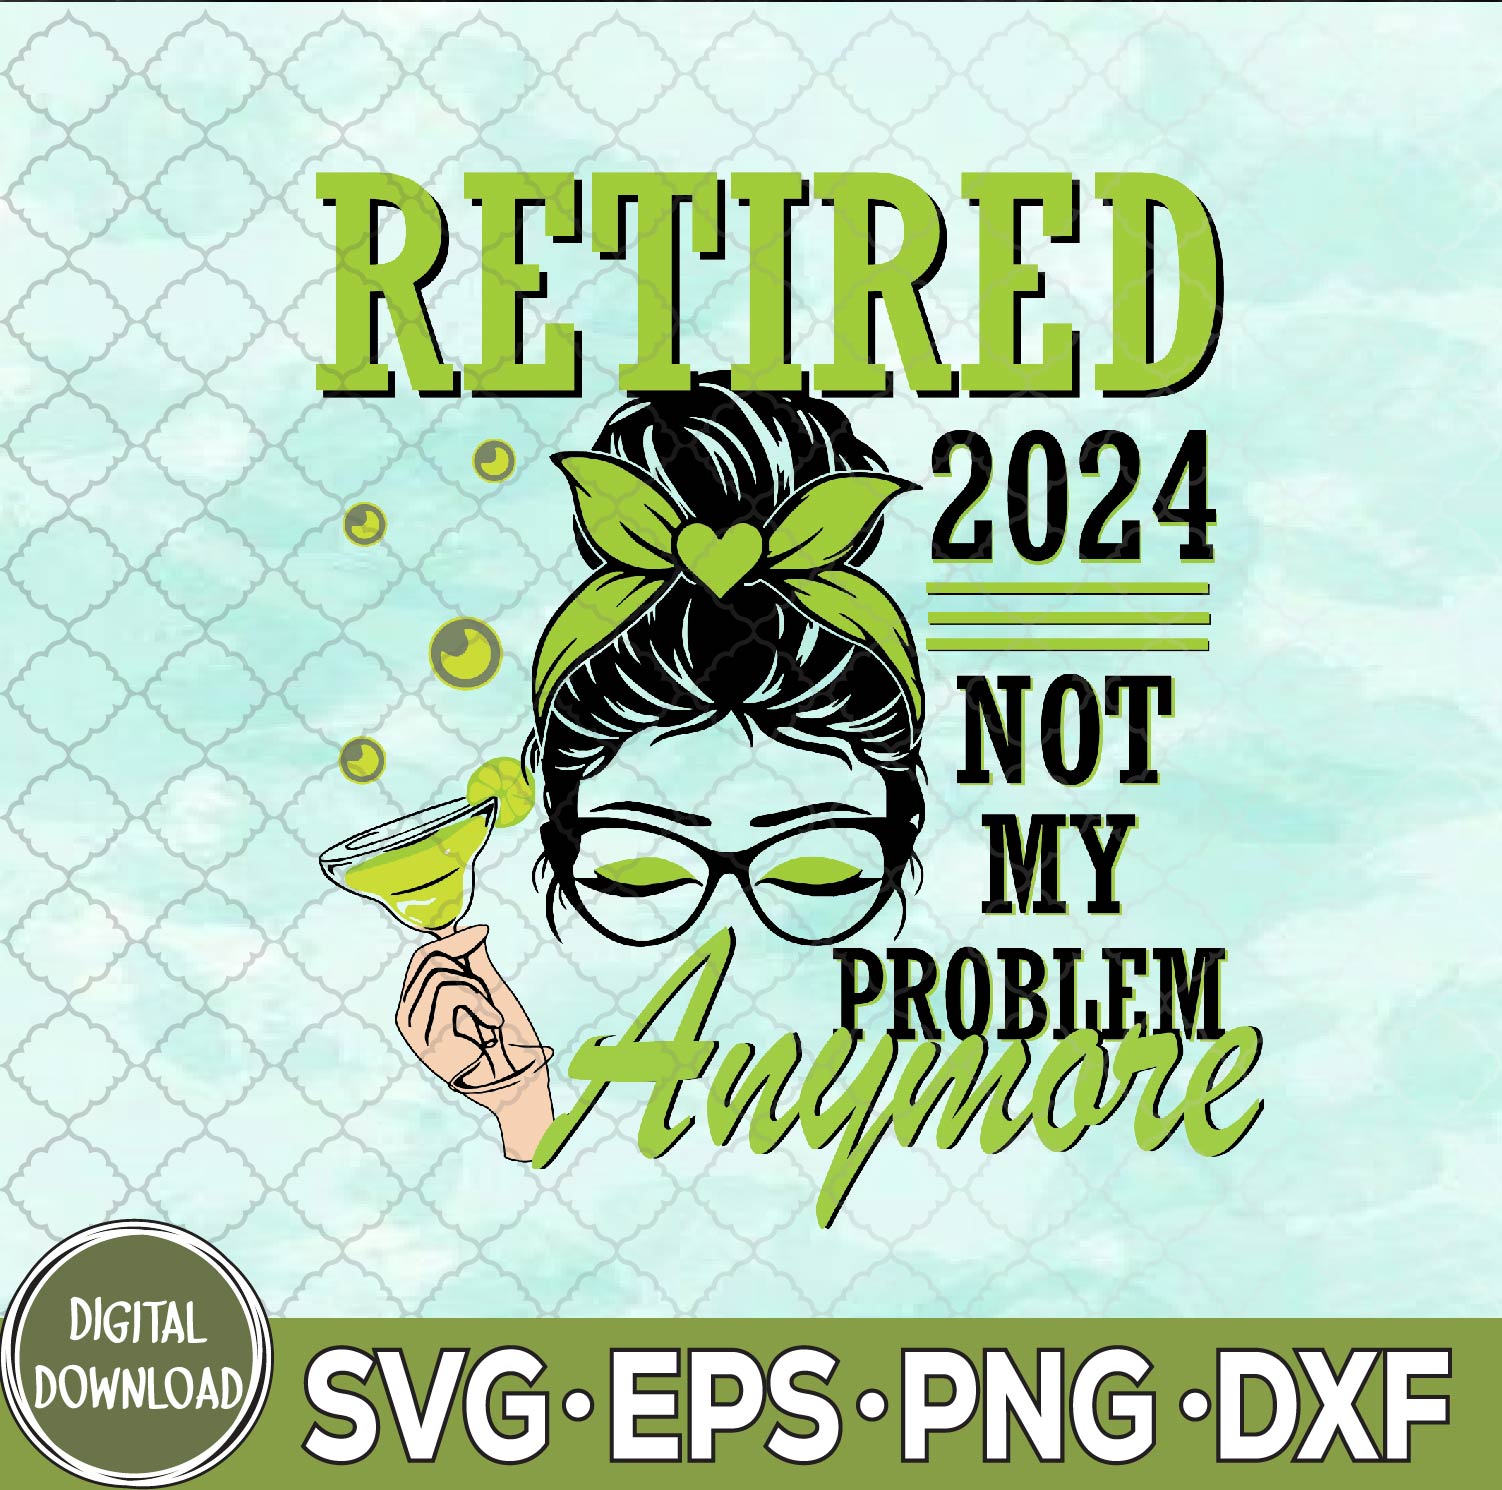 WTMNEW9file 09 181 Retired 2024 Not My Problem Anymore Retirement Svg, Png, Digital Download